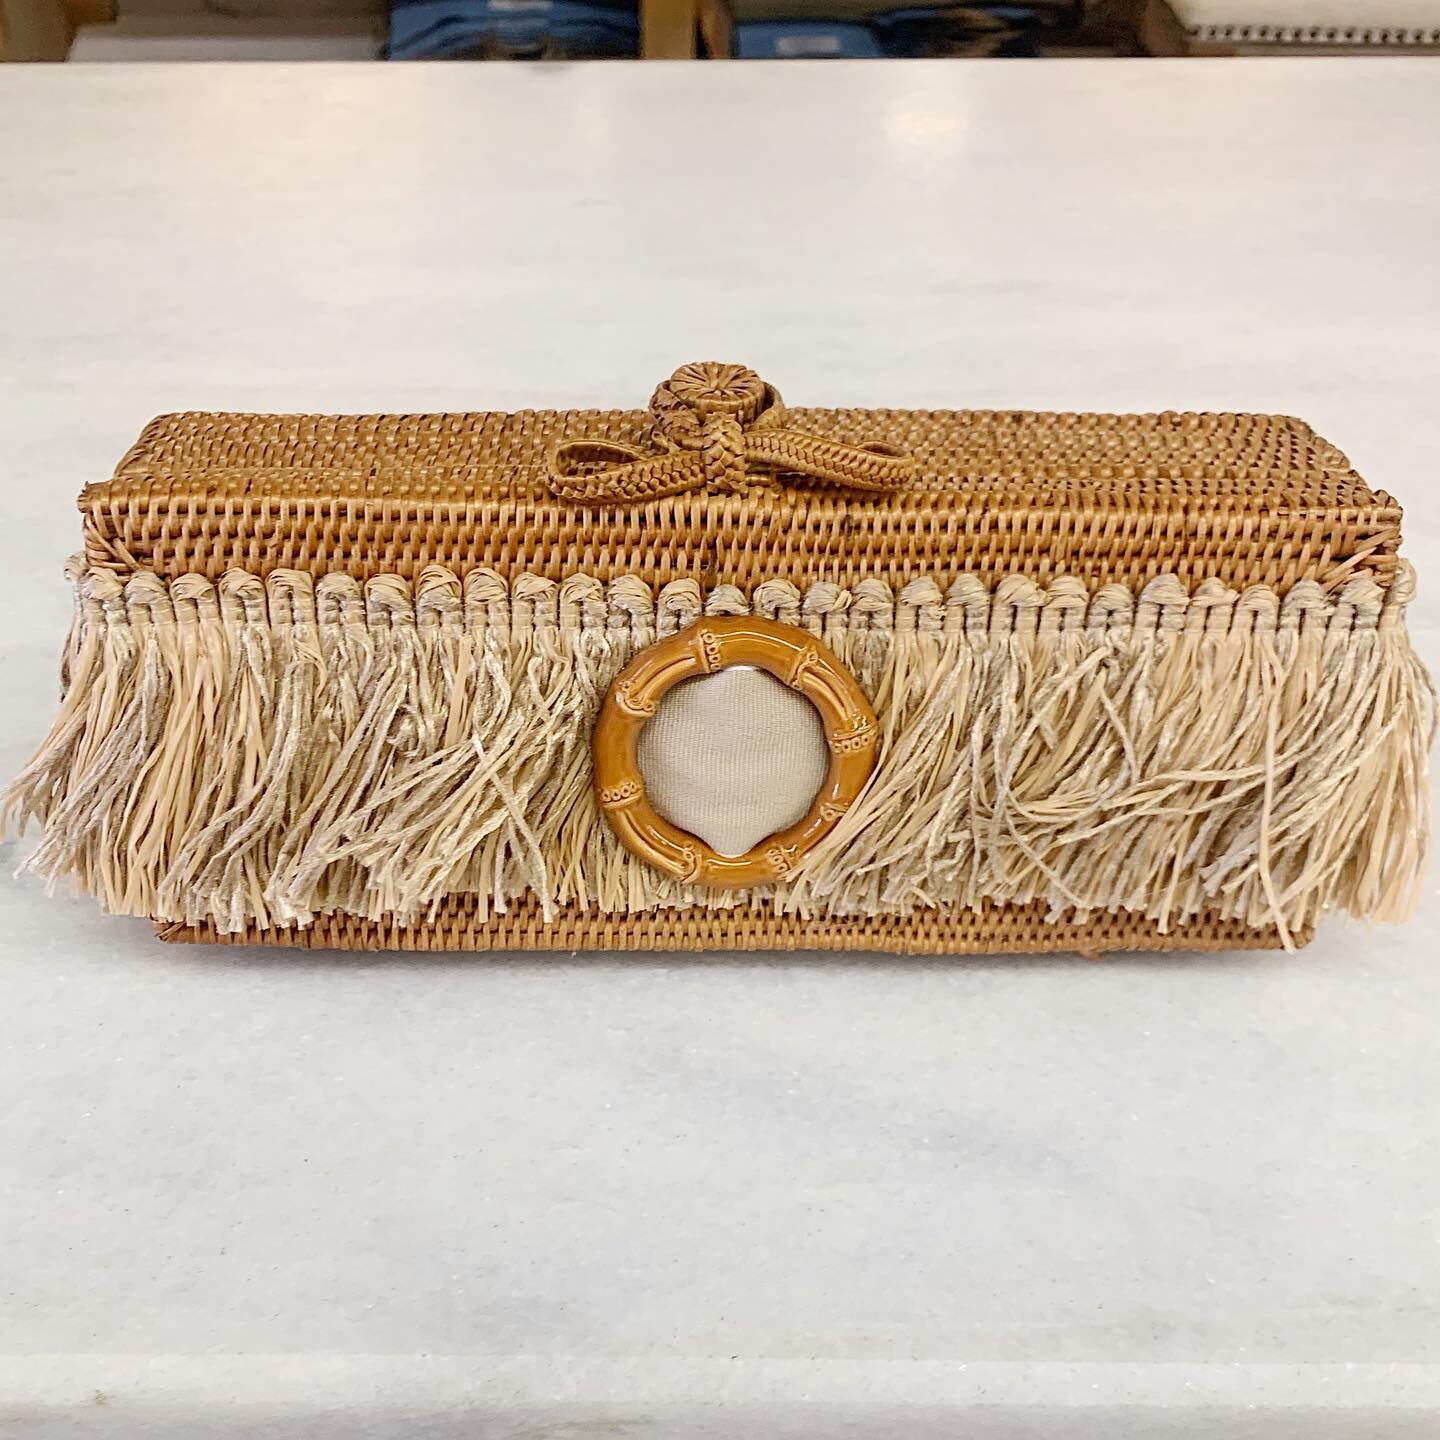 Introducing... your new best friend!!! This Leisi Lerch clutch is a summer must-have and we are IN LOVE 😍 Come shop with us 9-5 Monday-Friday all summer long! 

#wakefieldhomeal #downtownopelika #summershopping #strawbag #summerfashion